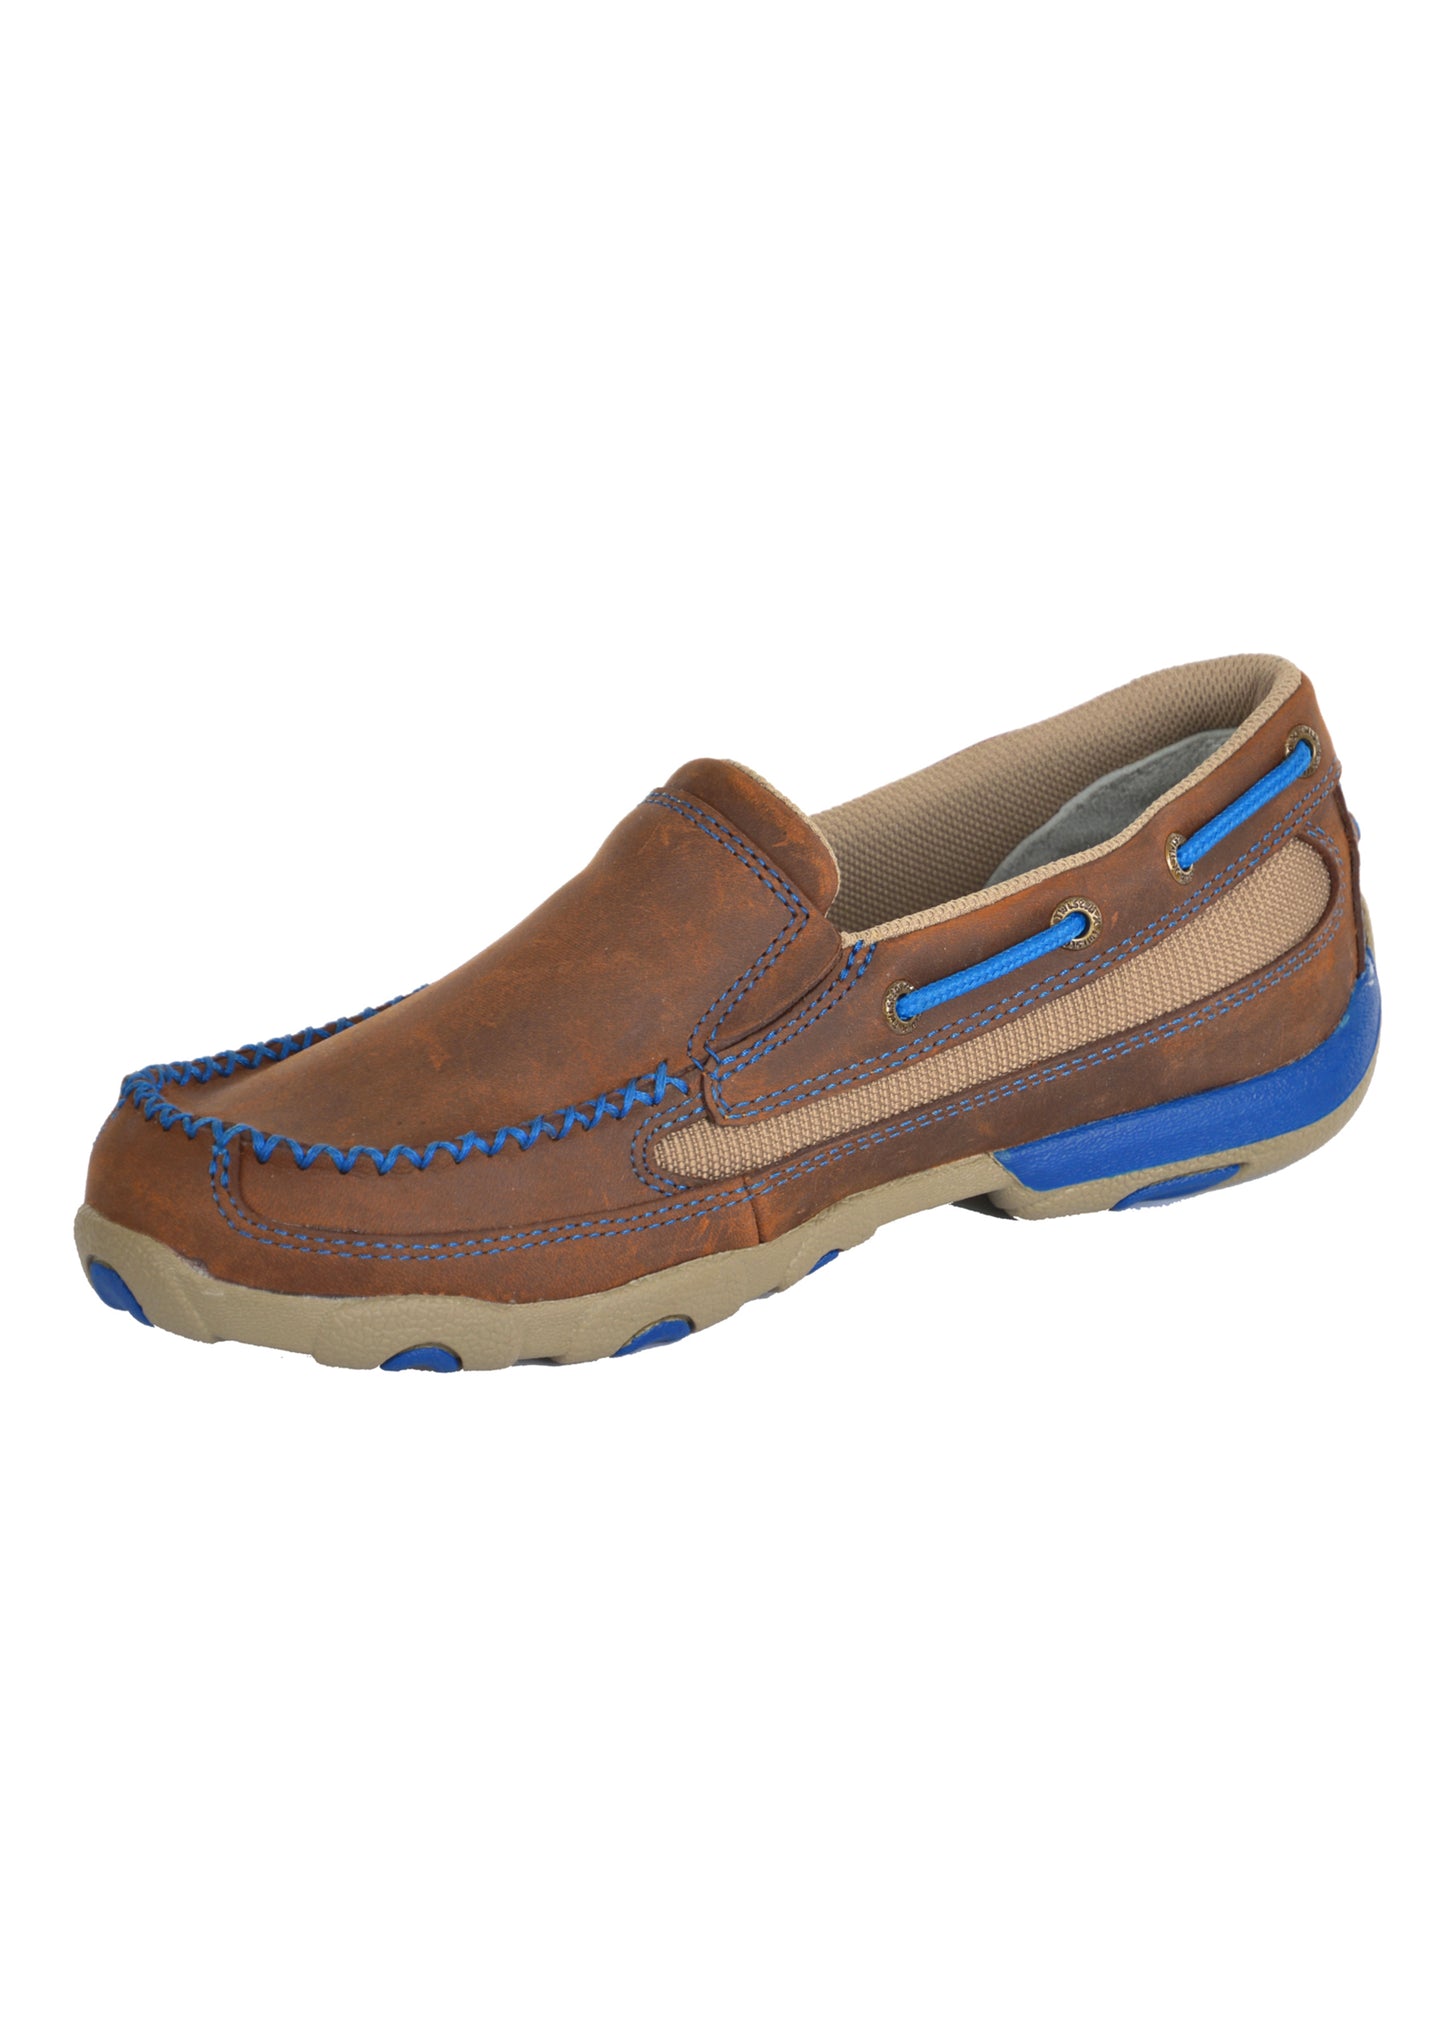 Twisted X Mens Casual Driving Mocs Boat Slip On  - TCMDMS019 - ON SALE